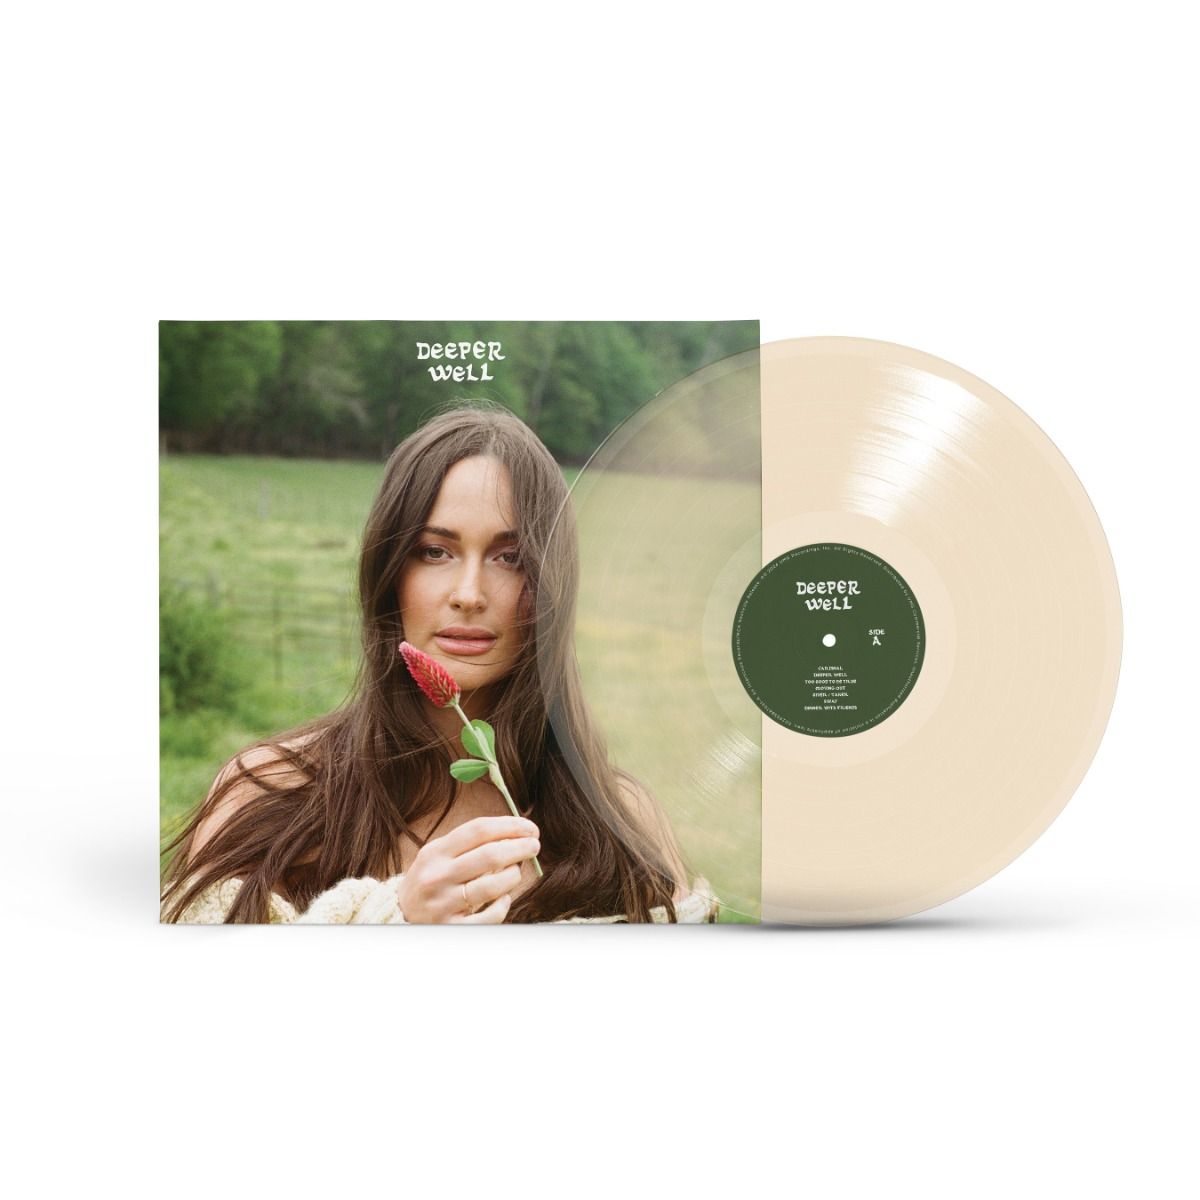 NEW/SEALED! Kacey Musgraves - Deeper Well (Transparent Cream Colored Vinyl)